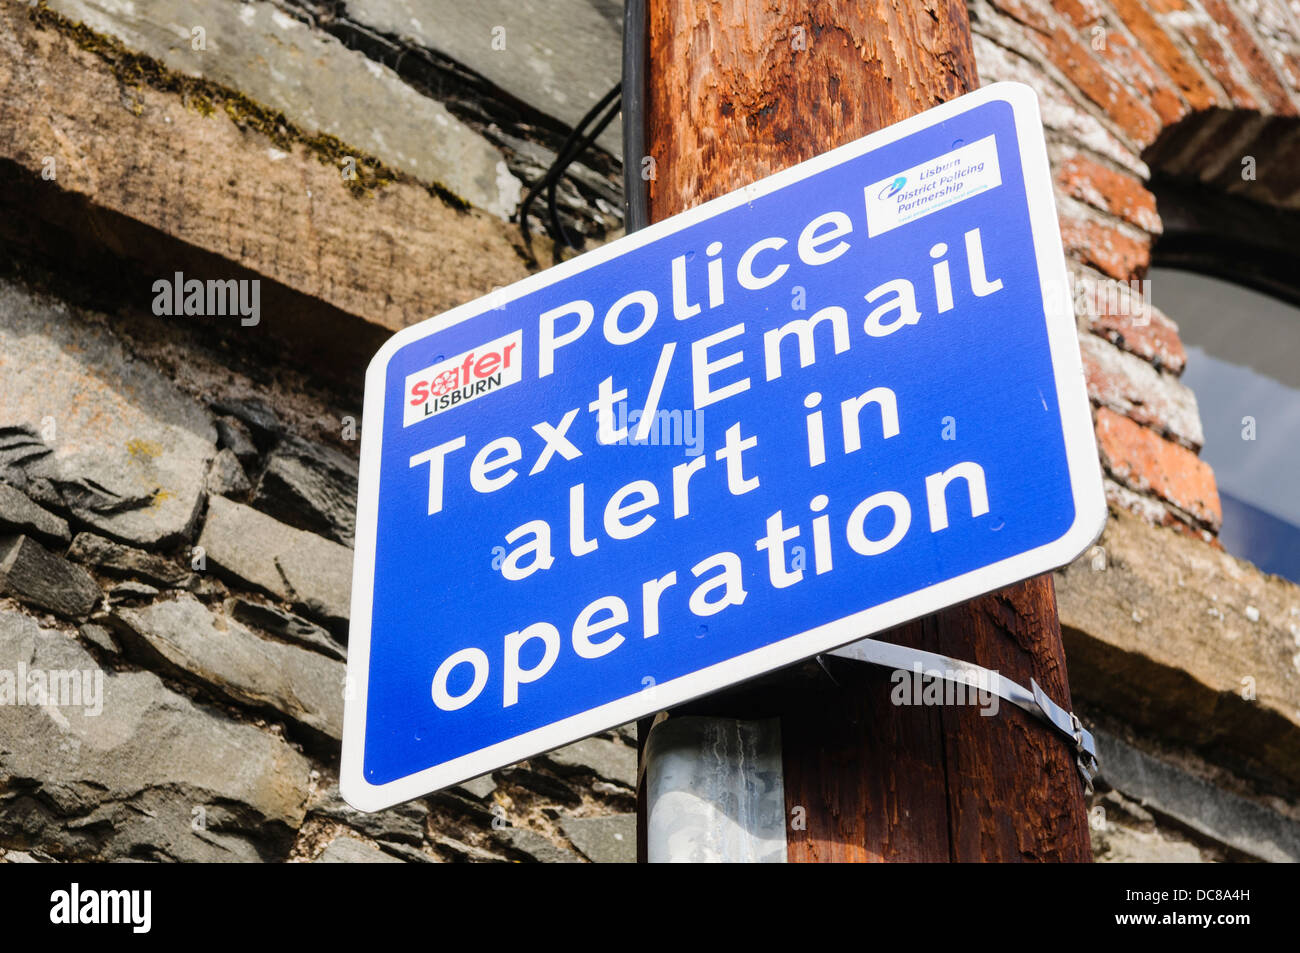 Sign warning public that 'Police Text/Email alert in operation' Stock Photo